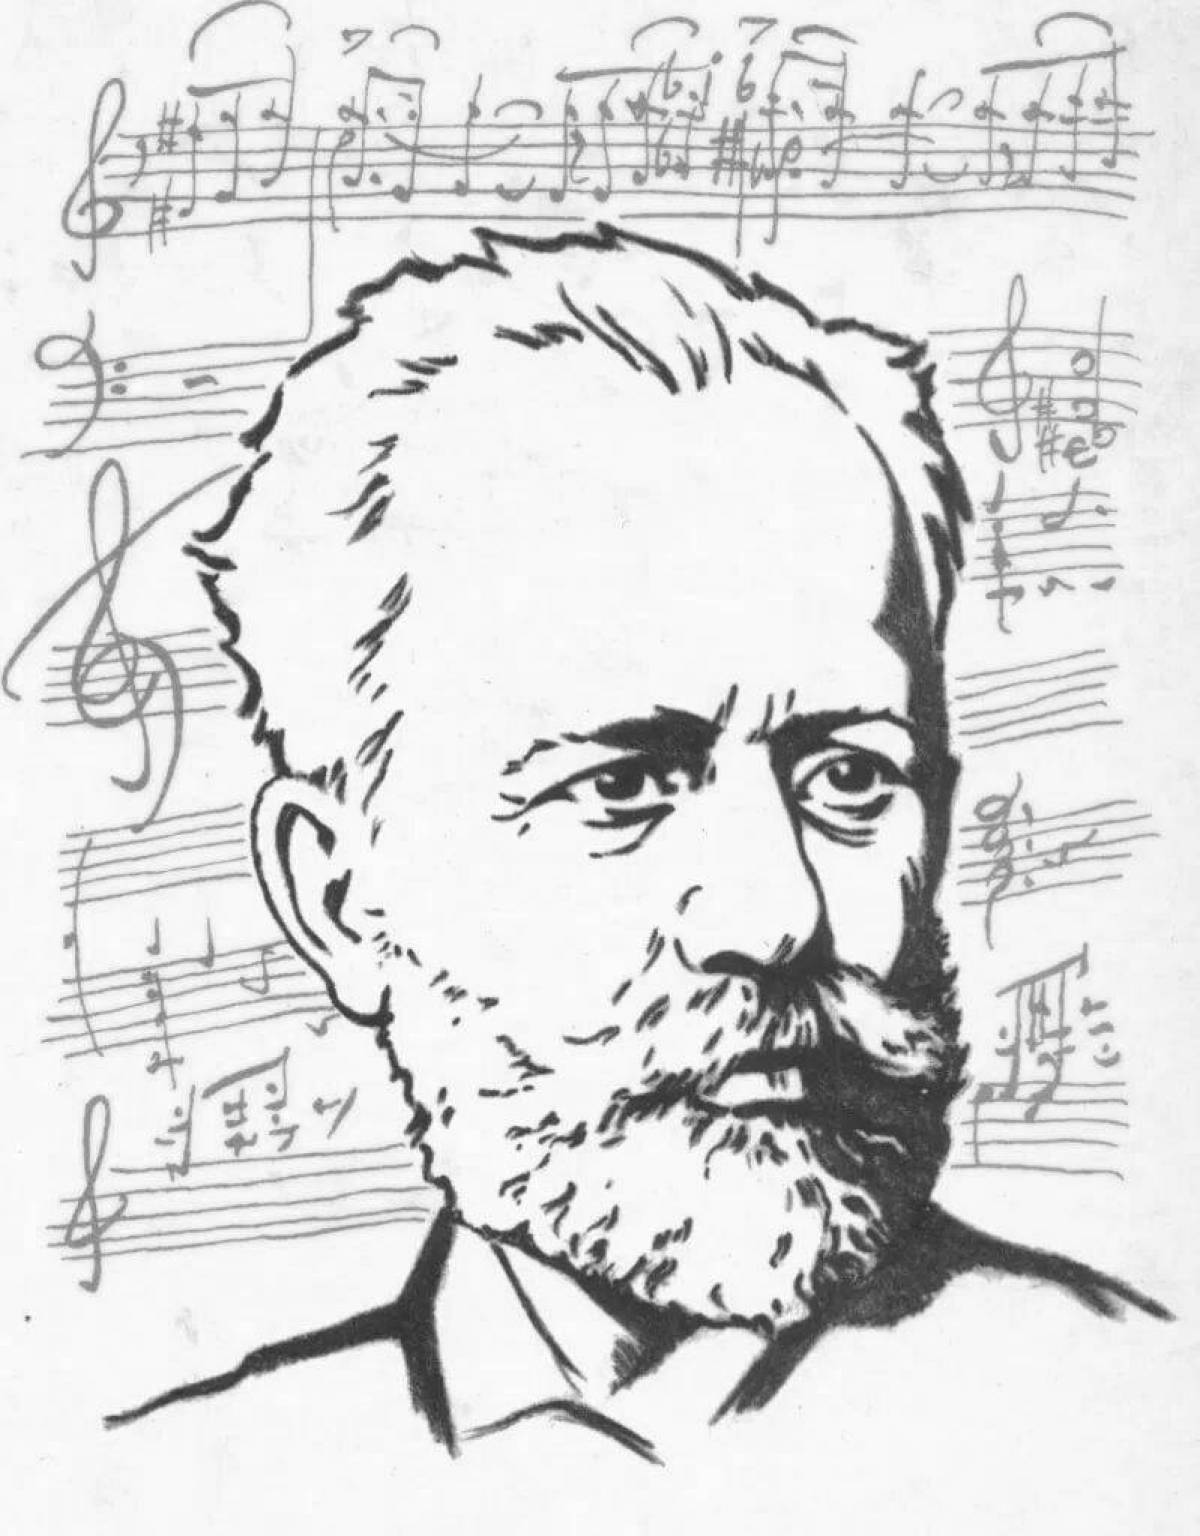 Exquisite coloring by Tchaikovsky